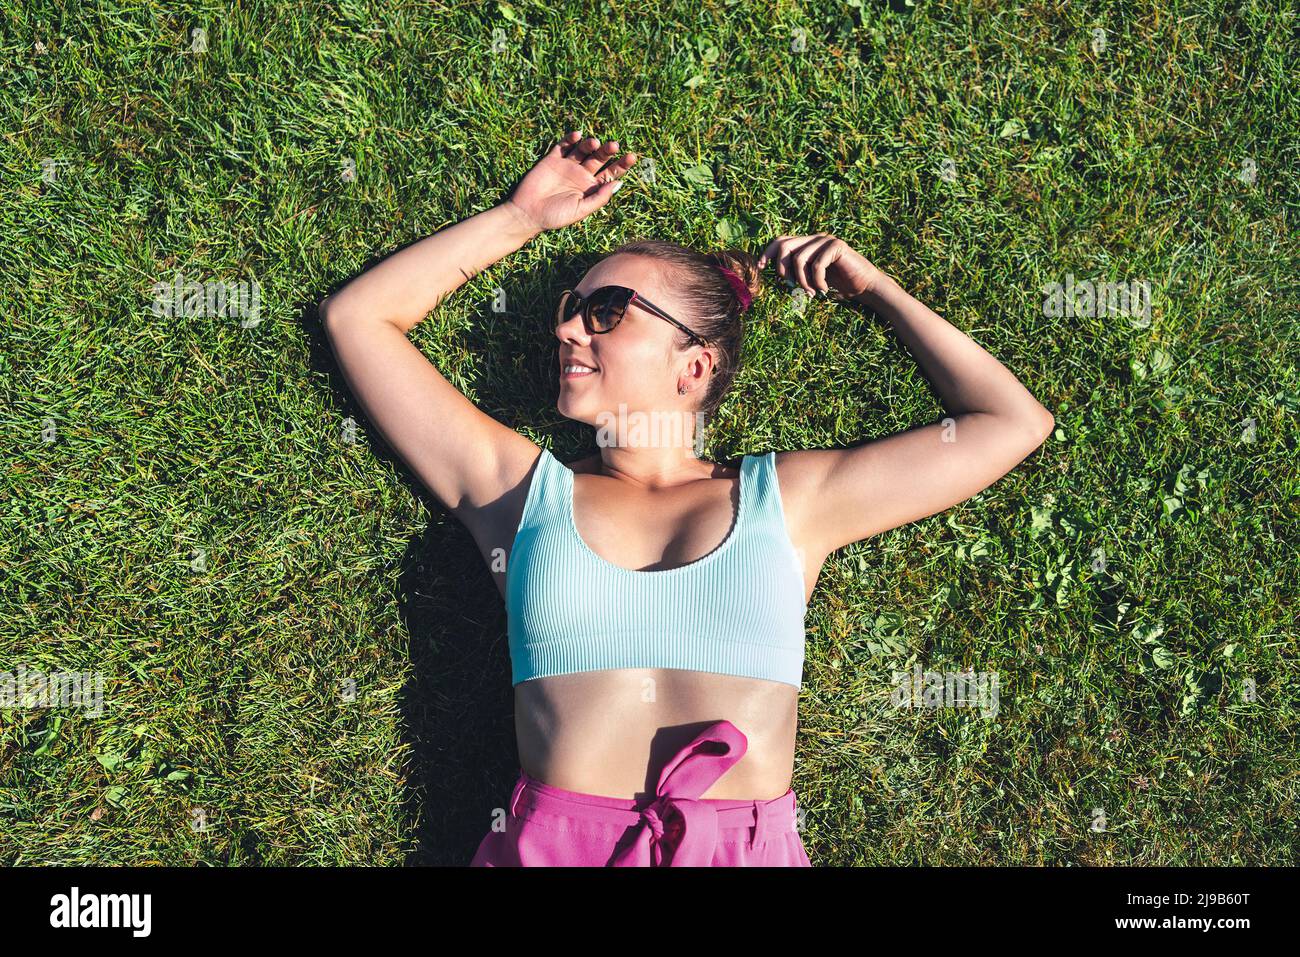 Resting in grass in green garden, above top view. Woman lying down relaxing in the nature. Lazy girl day dreaming outside in the park. Stock Photo